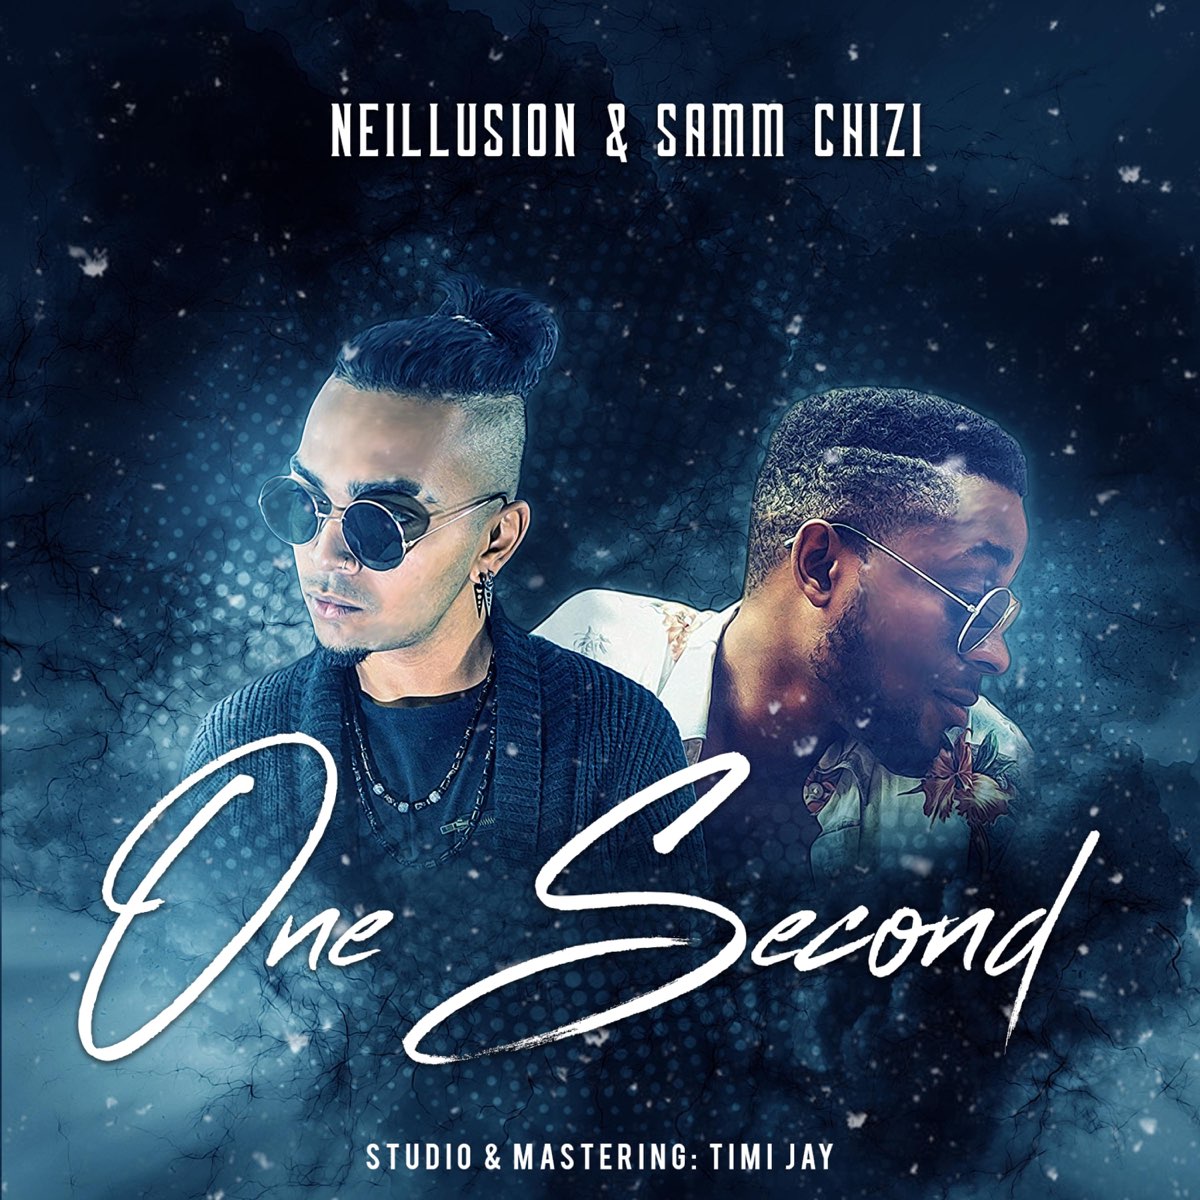 Seconds музыка. One second. 1 Seconds Music.